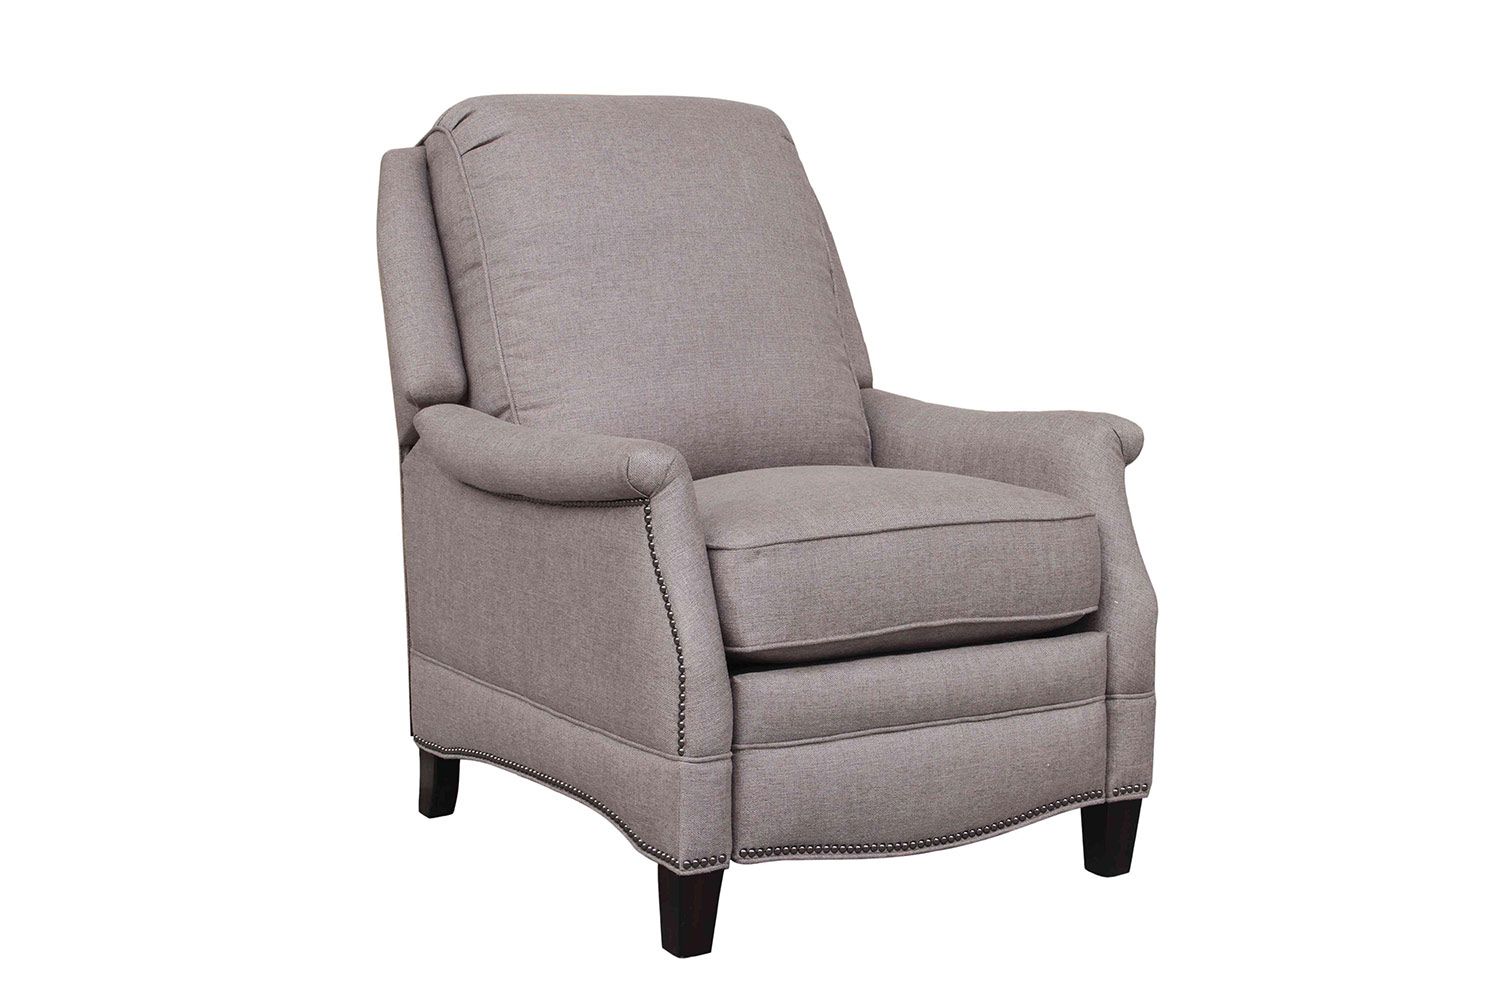 Barcalounger Ashebrooke Recliner Chair - Z-Hory taupe fabric